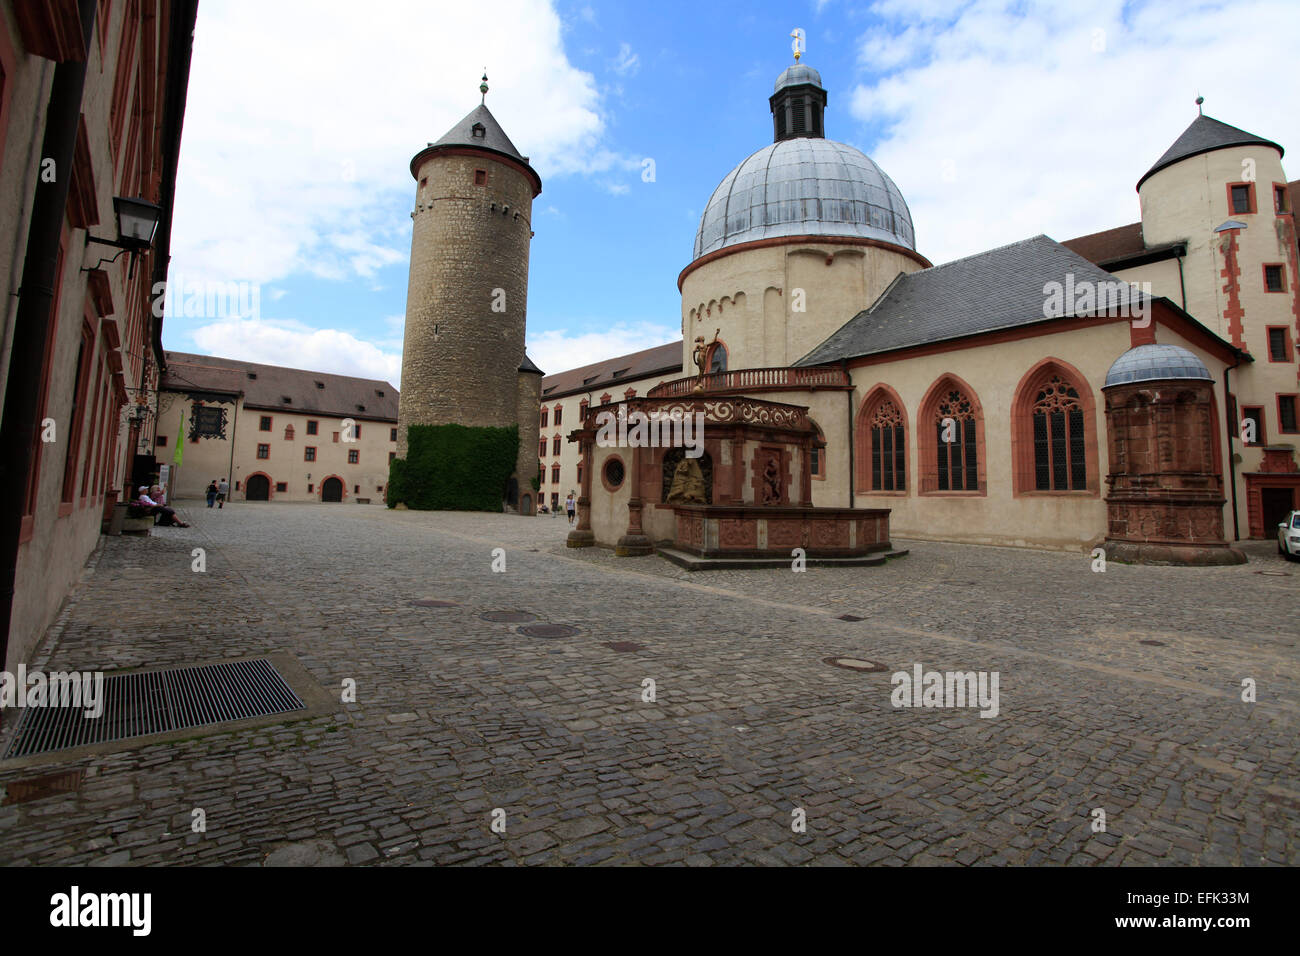 The interior courtyard of the fortress Marienberg in Wuerzburg with Bergfried, St. Mary's Church and fountain. The fortress is surrounded by vineyards and overlooks the ancient university city with its domes, towers and bridges. Photo: Klaus Nowottnick Dat Stock Photo